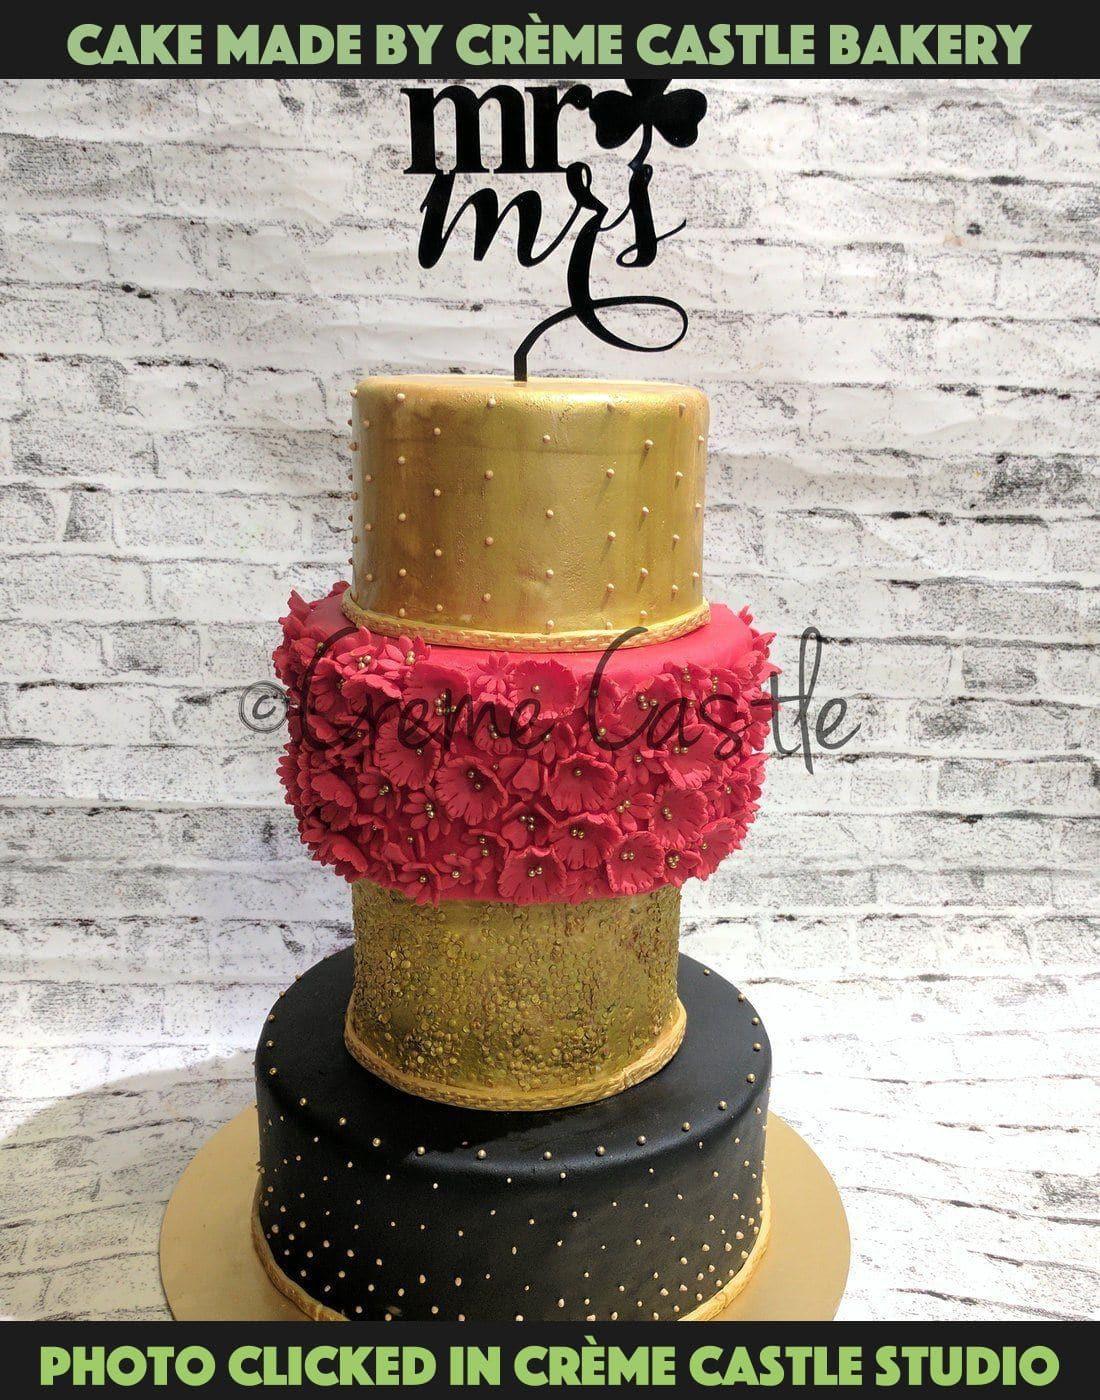 Red and golden wedding cake - Creme Castle